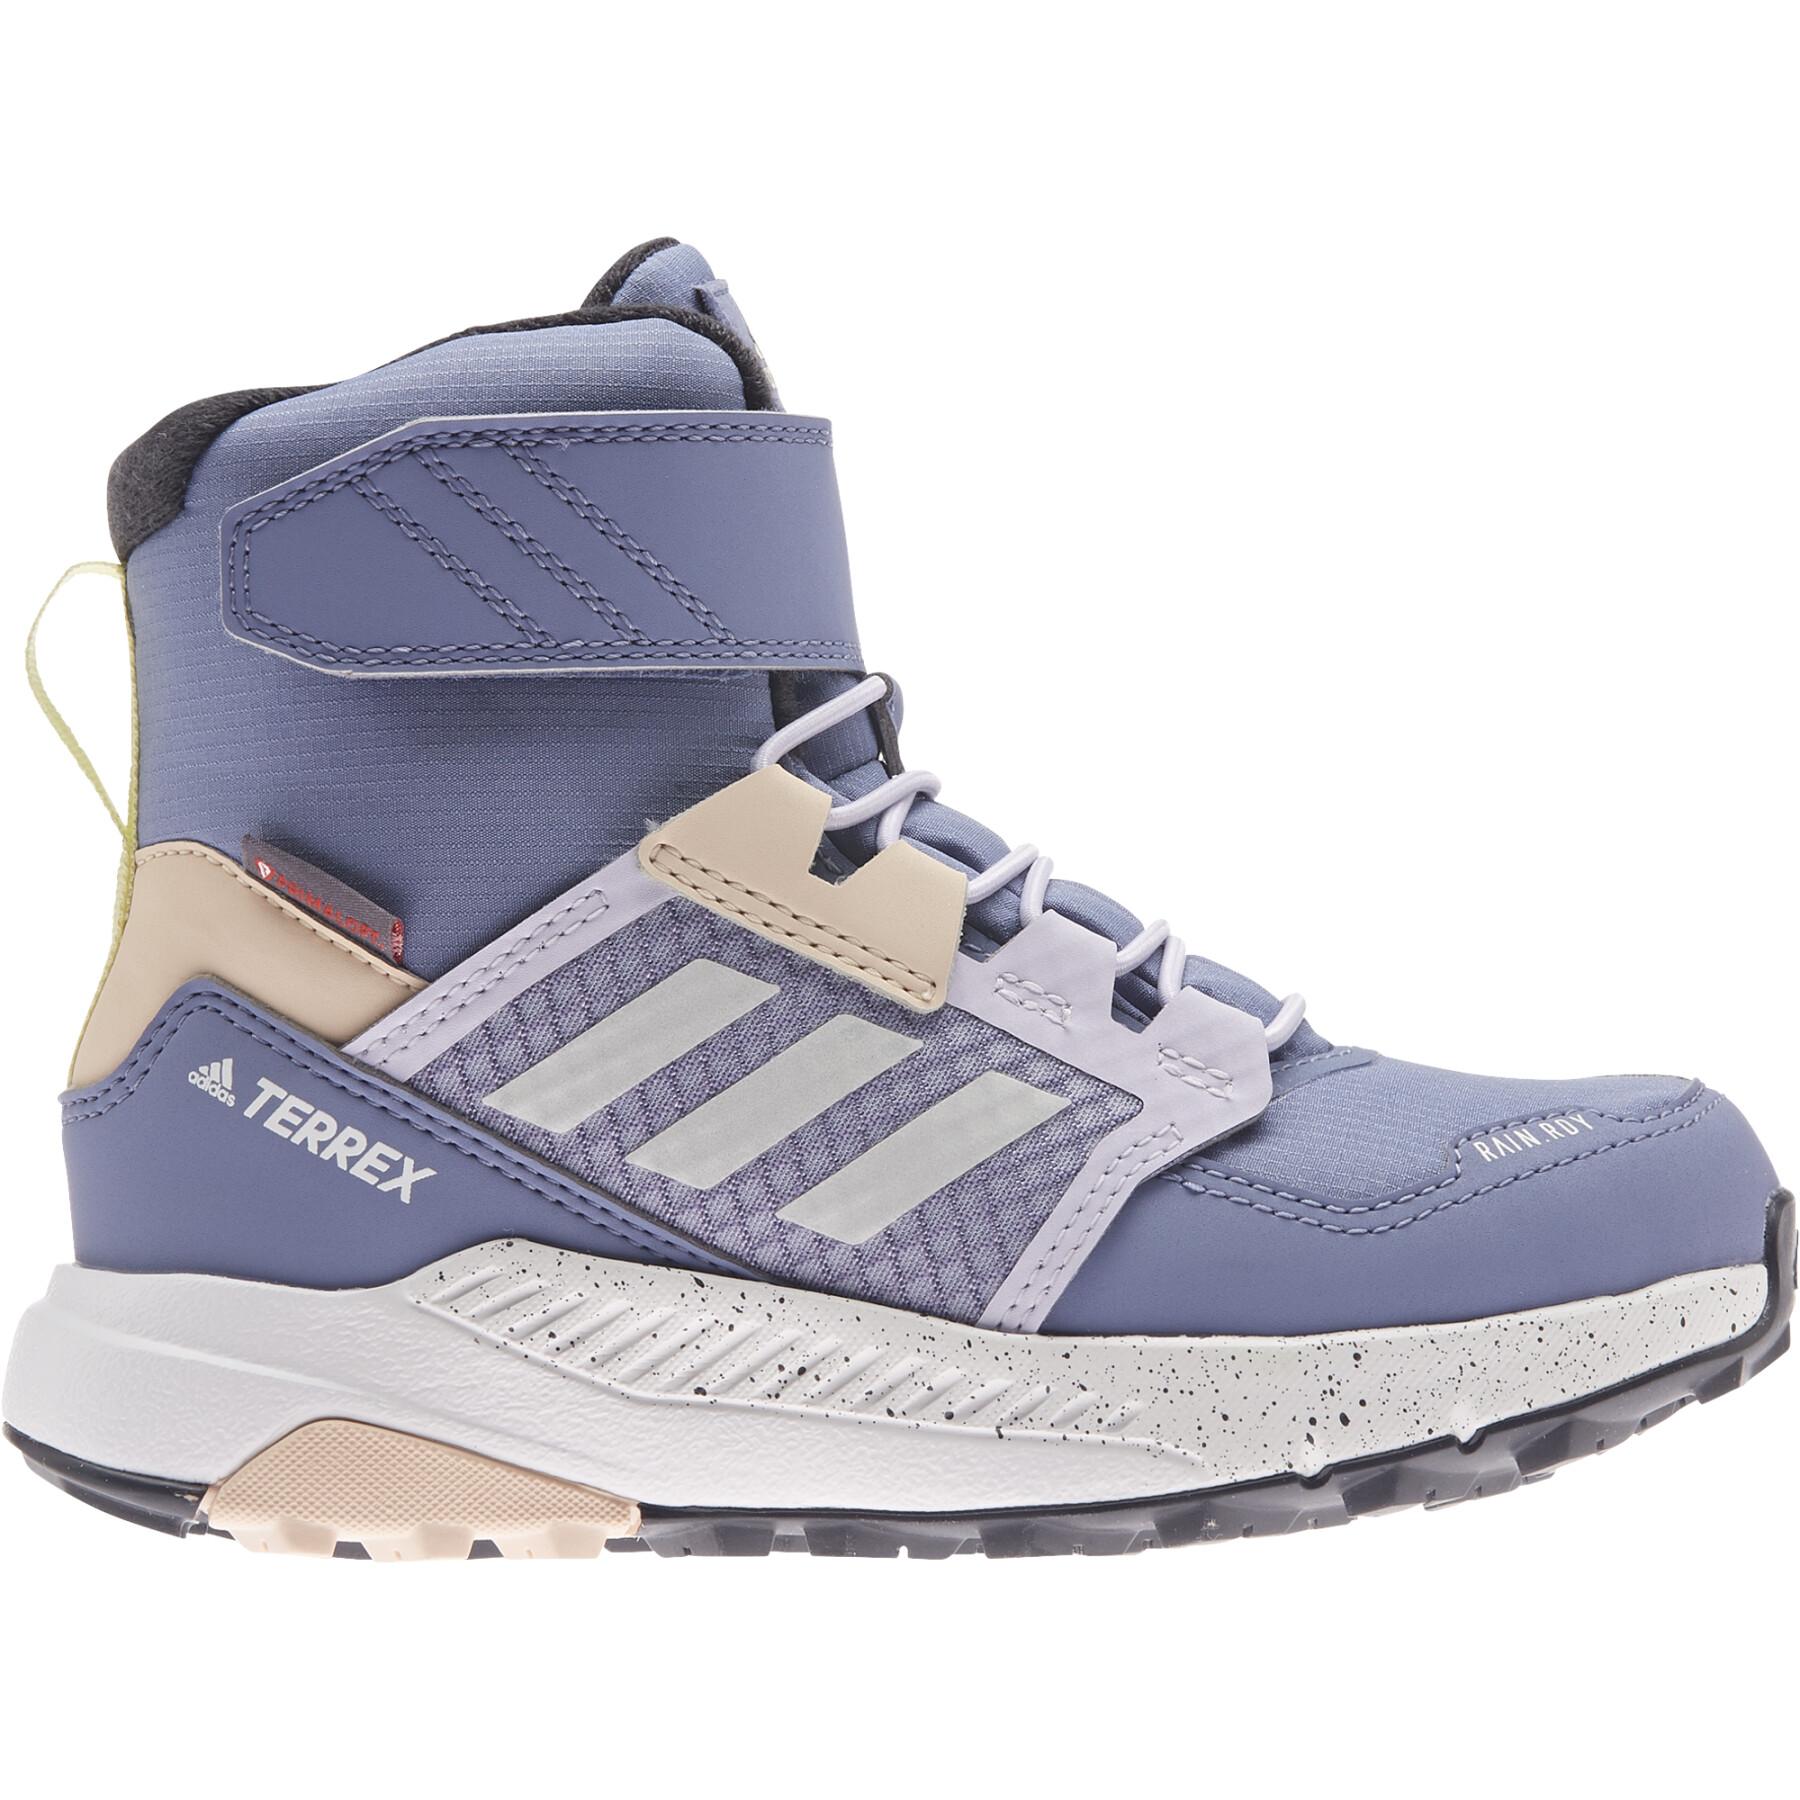 Children's shoes adidas Terrex Trailmaker High COLD.RDY Hiking